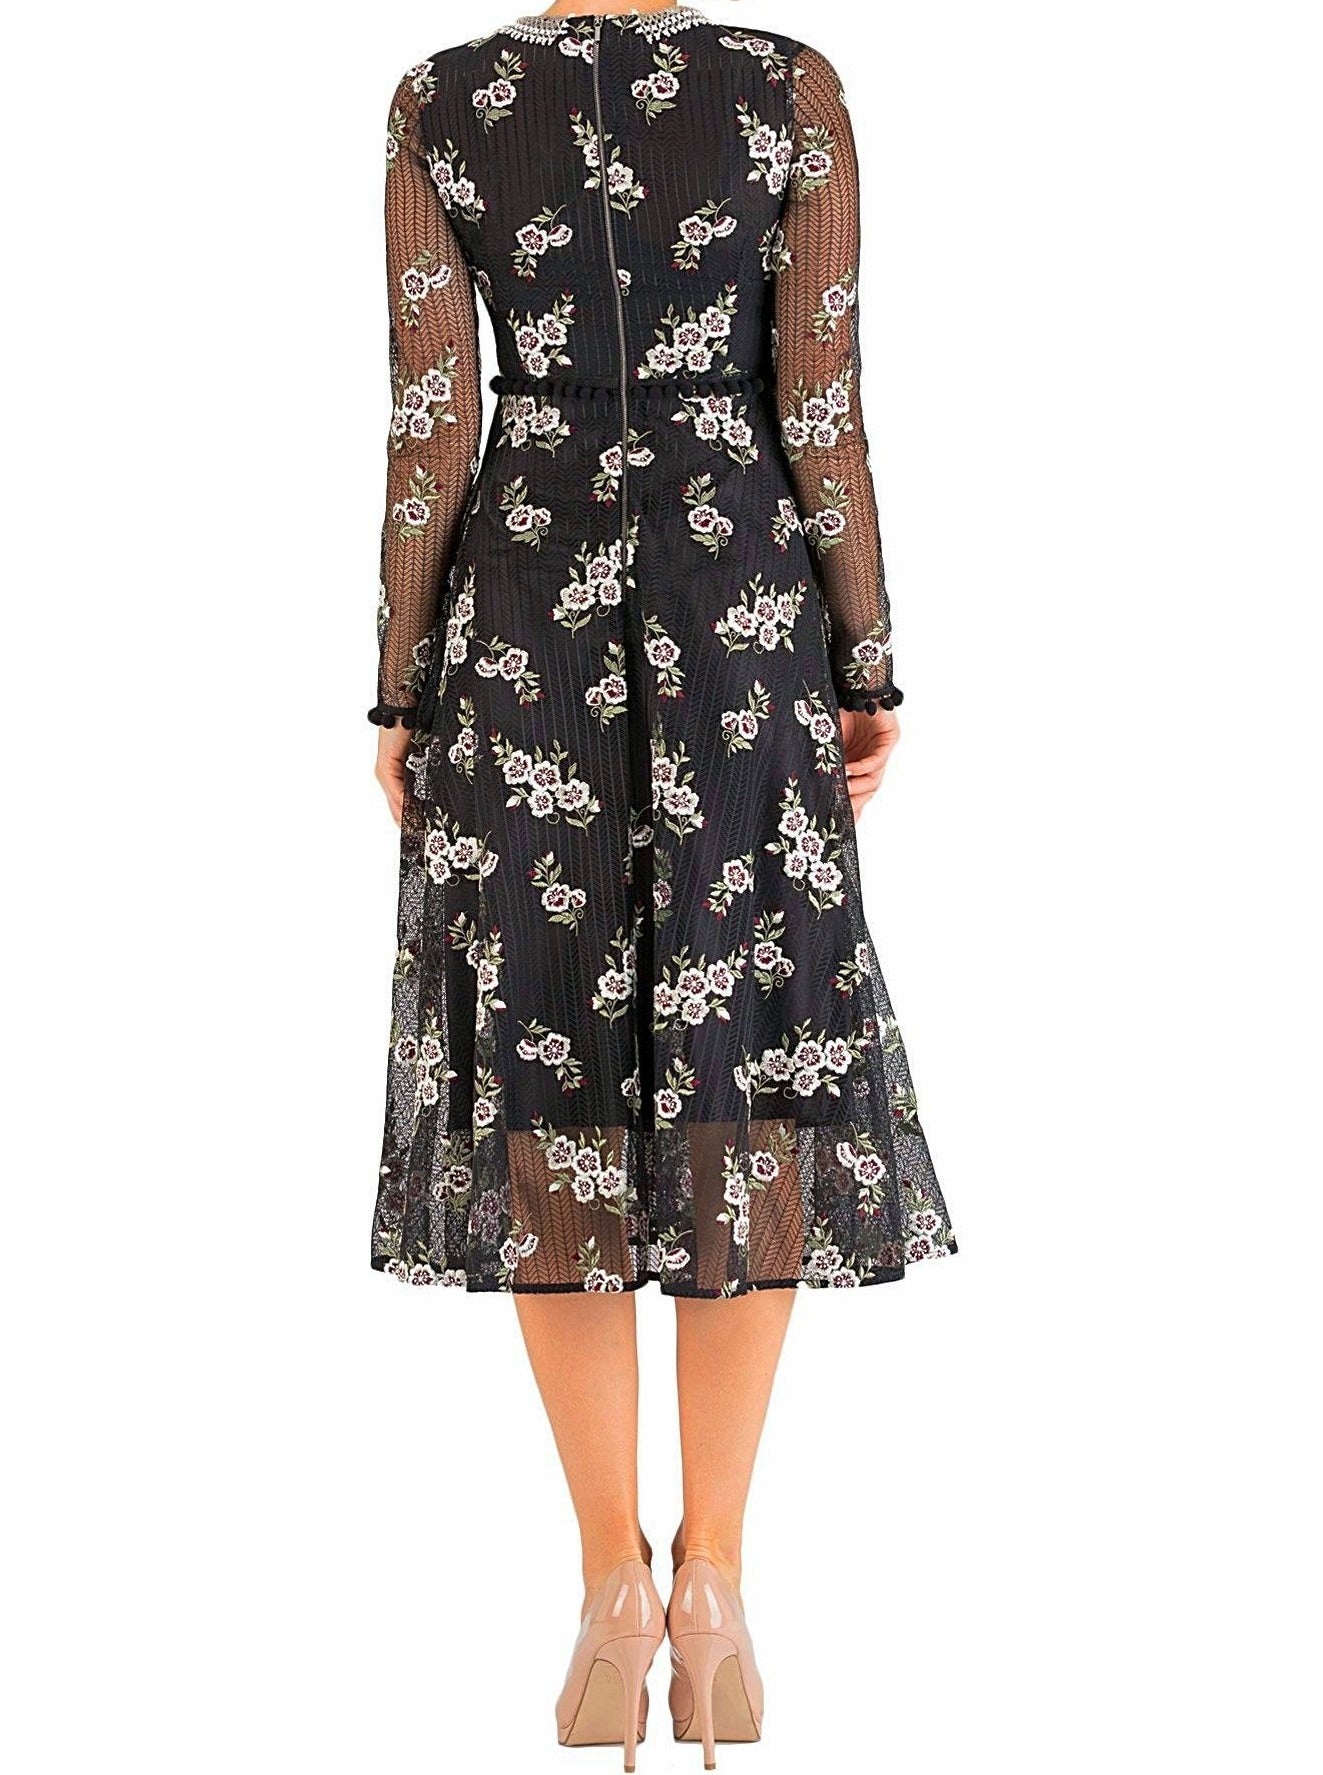 Feather Floral Black Dress - 80% off